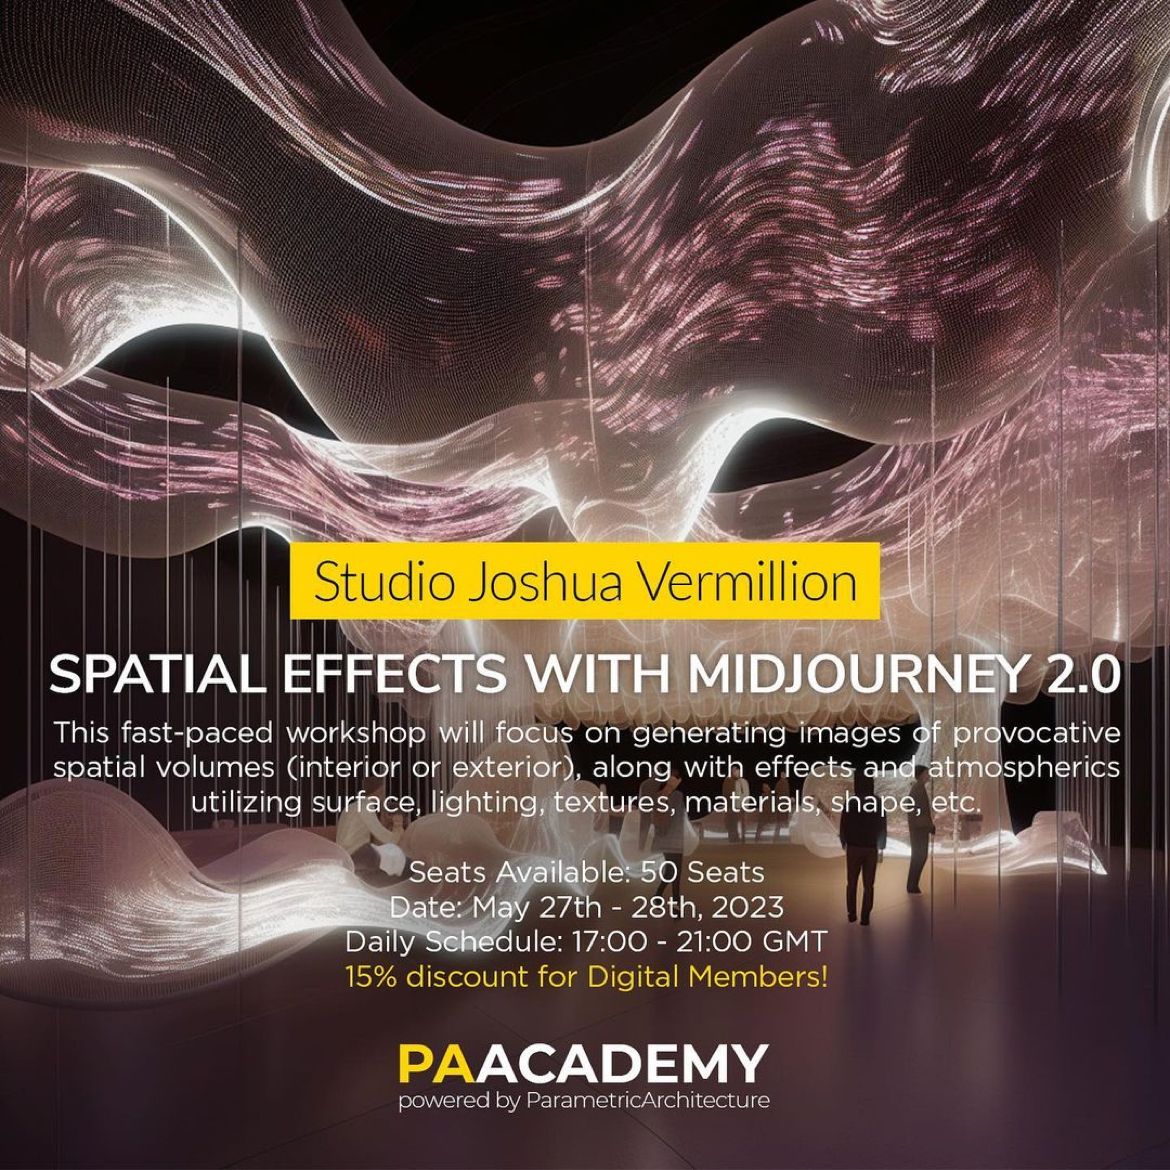 Spatial Effects with Midjourney 2.0 Workshop